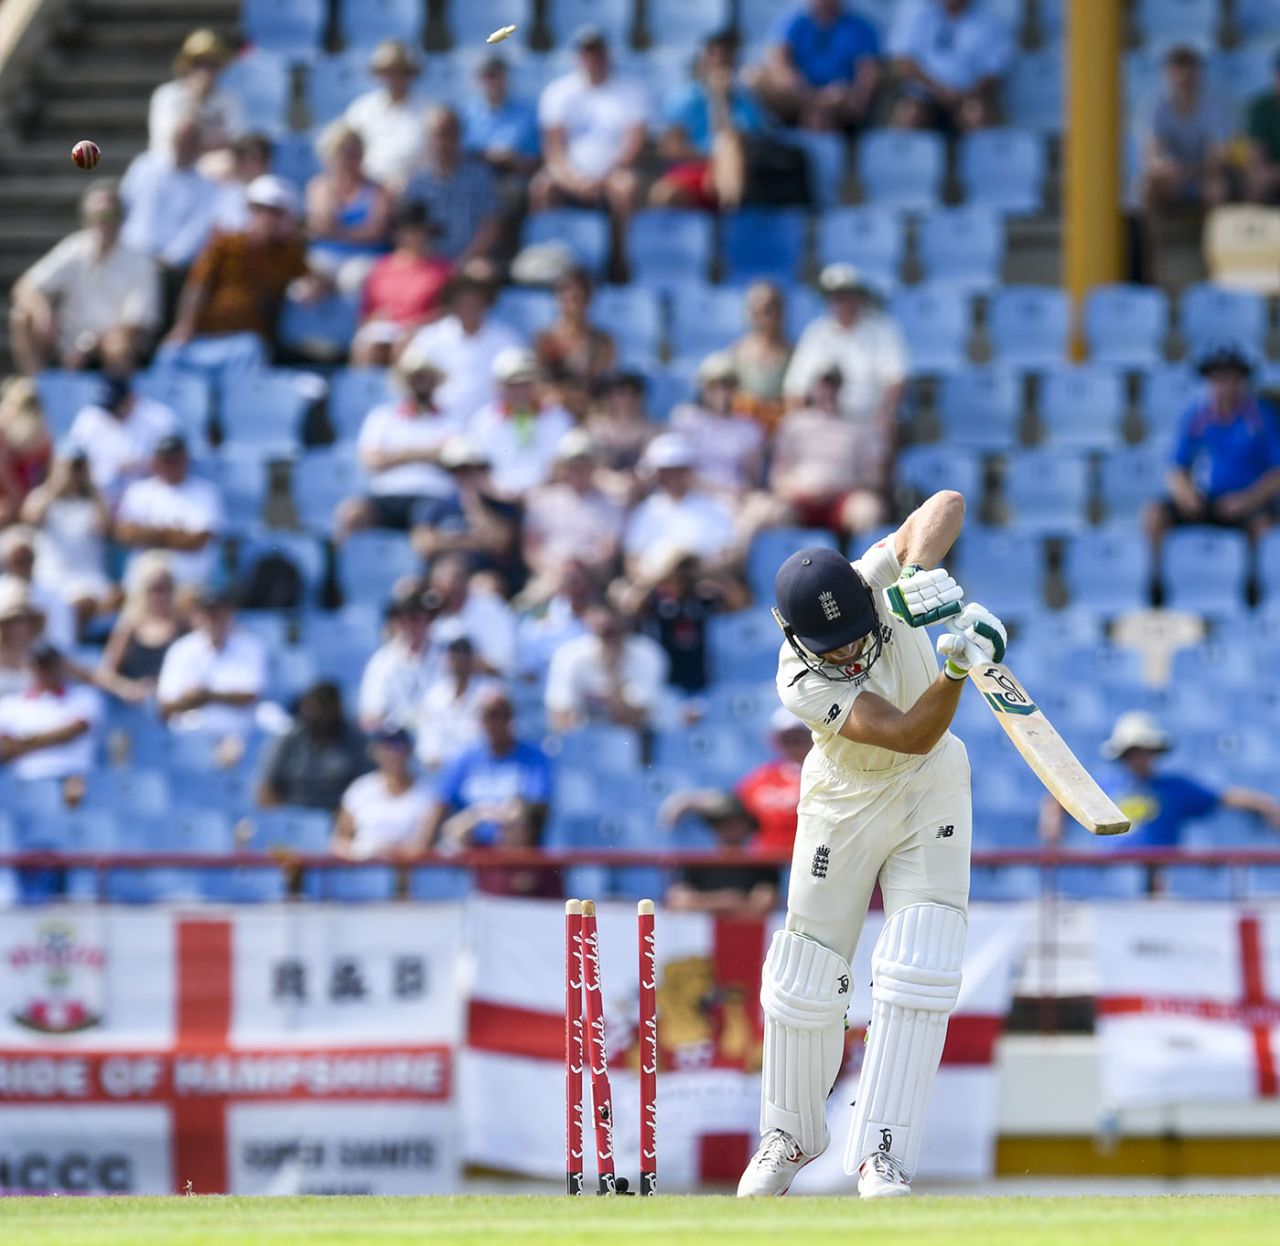 Jos Buttler was bowled attempting to drive, West Indies v England, 3rd Test, St Lucia, 2nd day, February 10, 2019